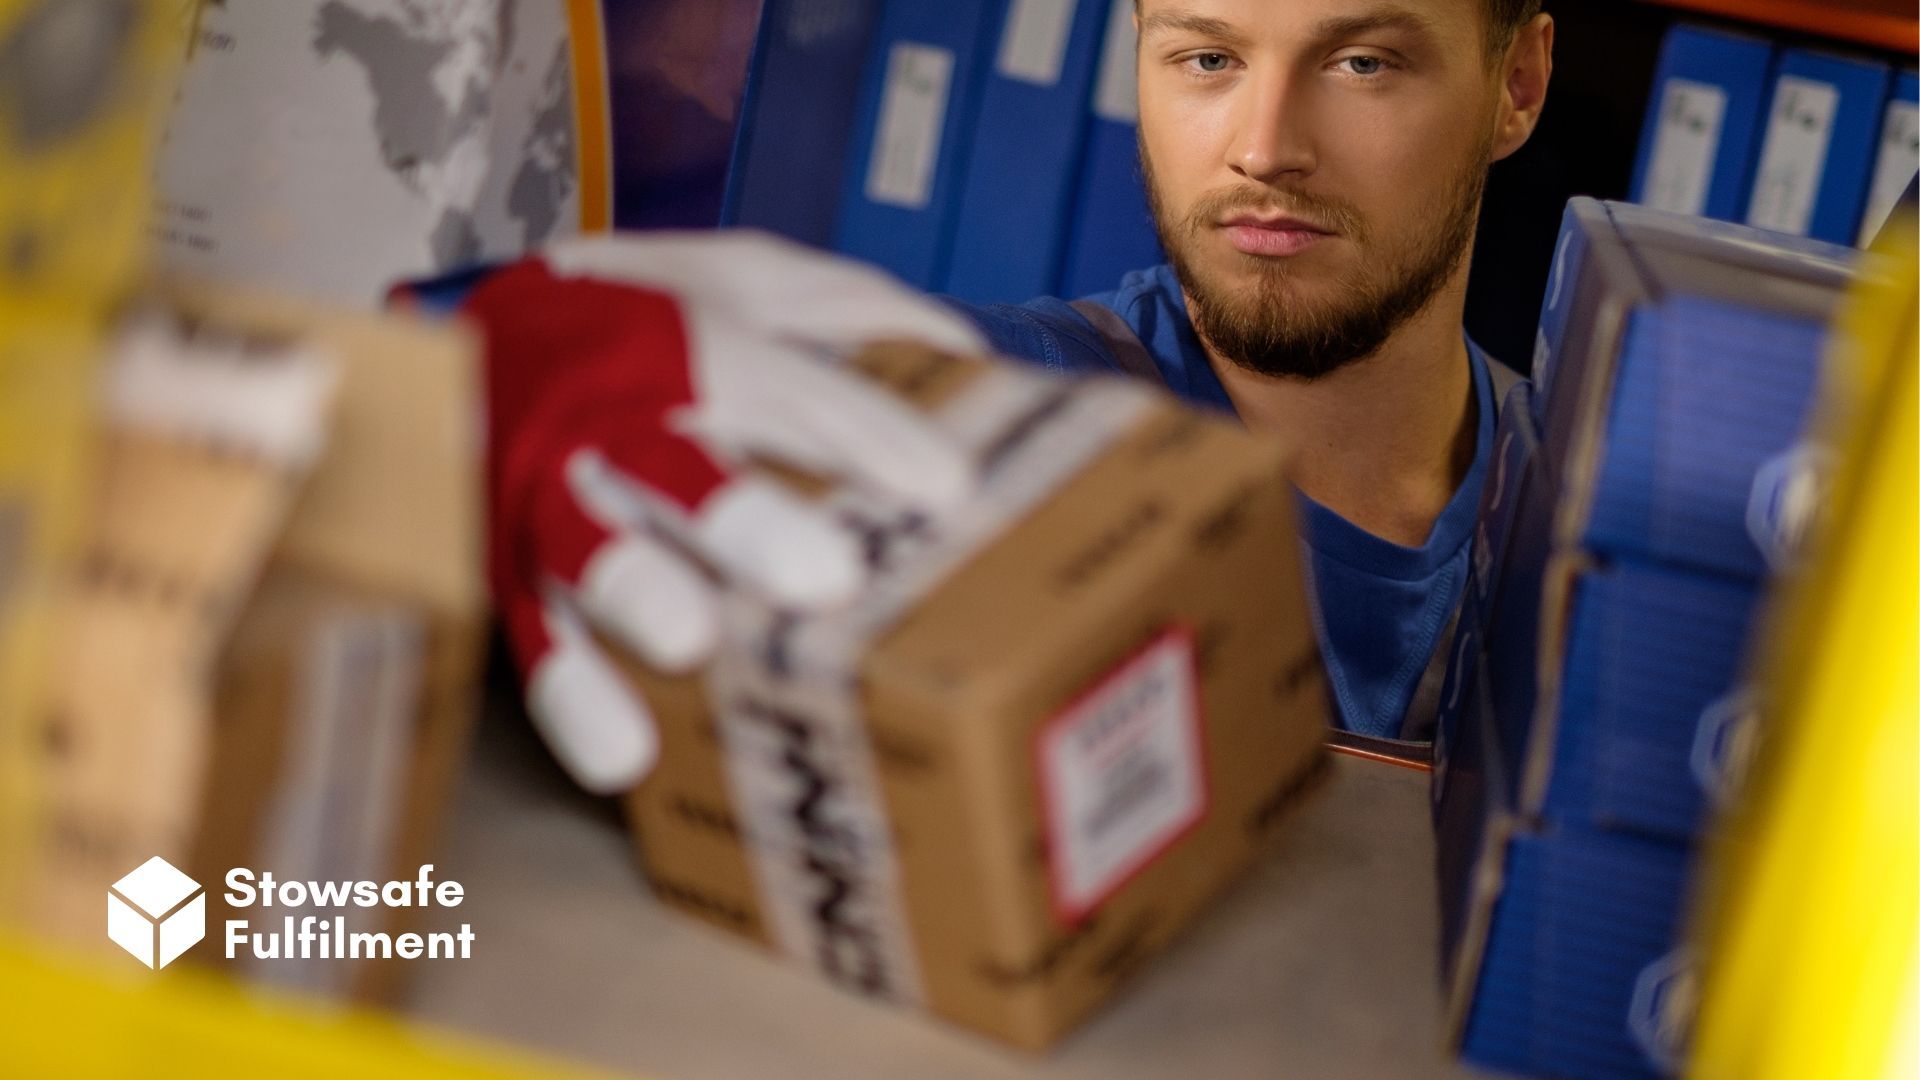 Spare parts form a tricky part of any business's inventory. Find out how third-party fulfilment can help you manage this part of the supply chain.
